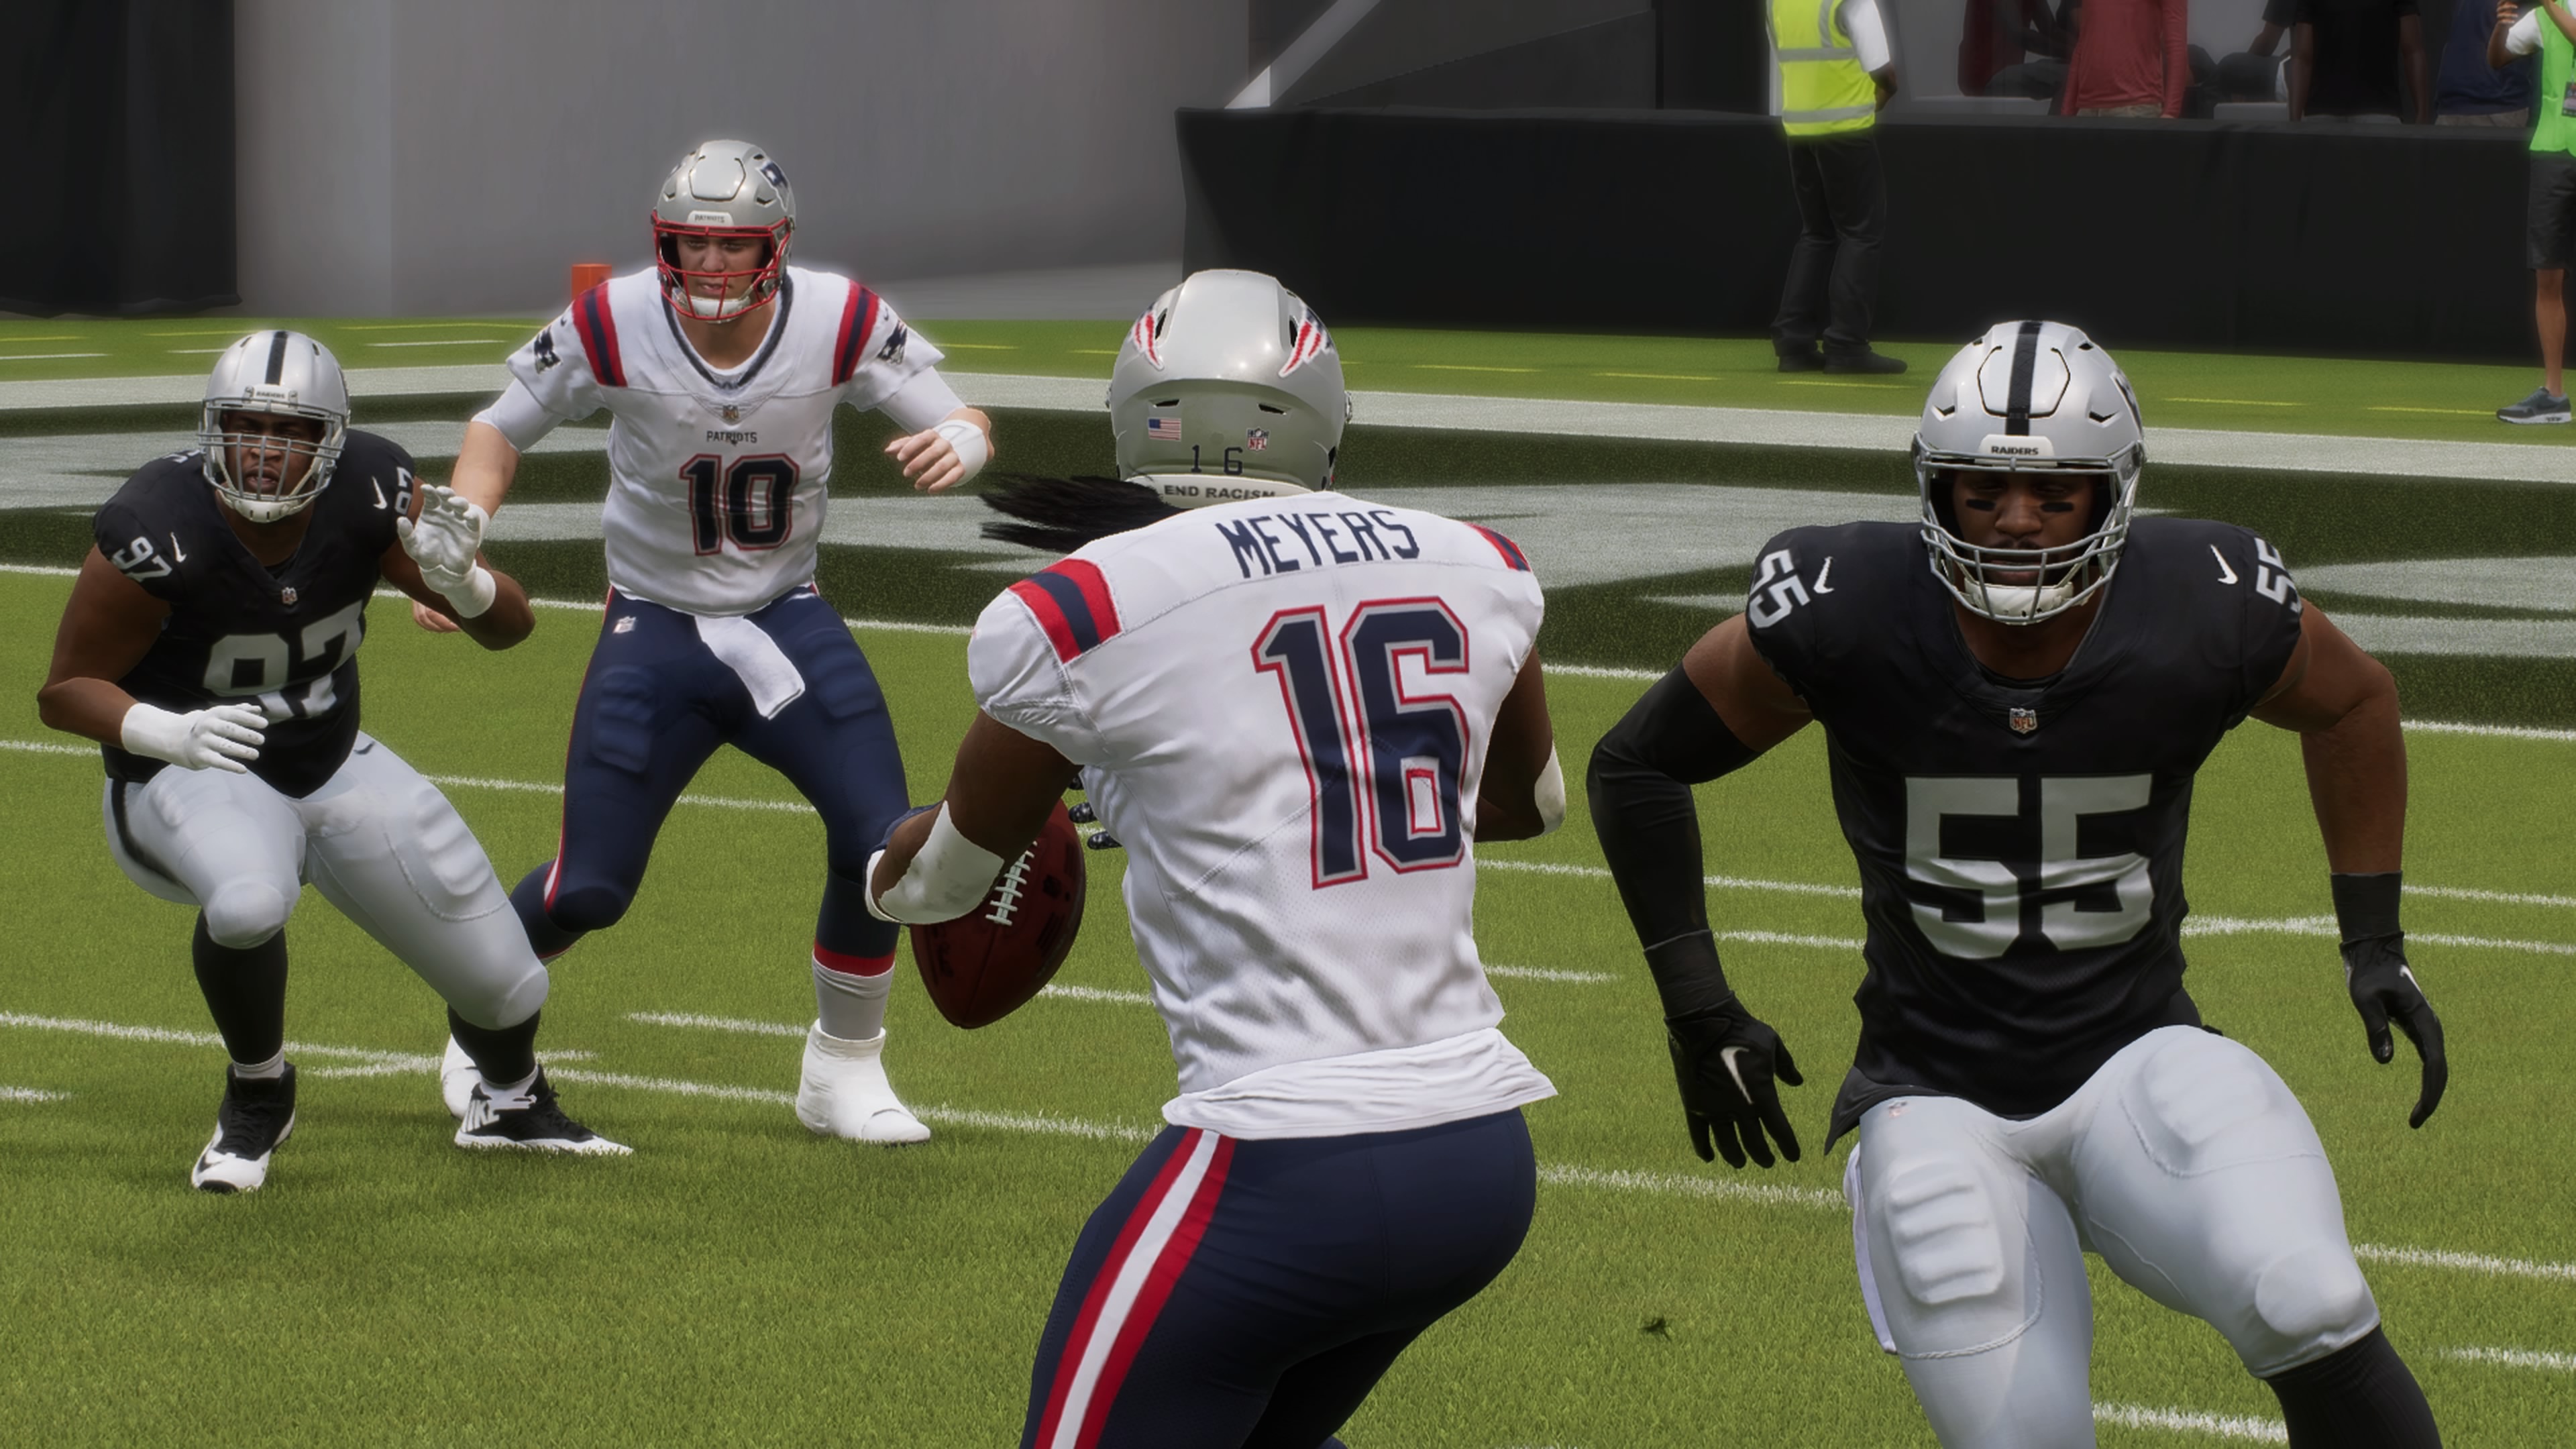 Madden 23: How to Make a Lateral Pass